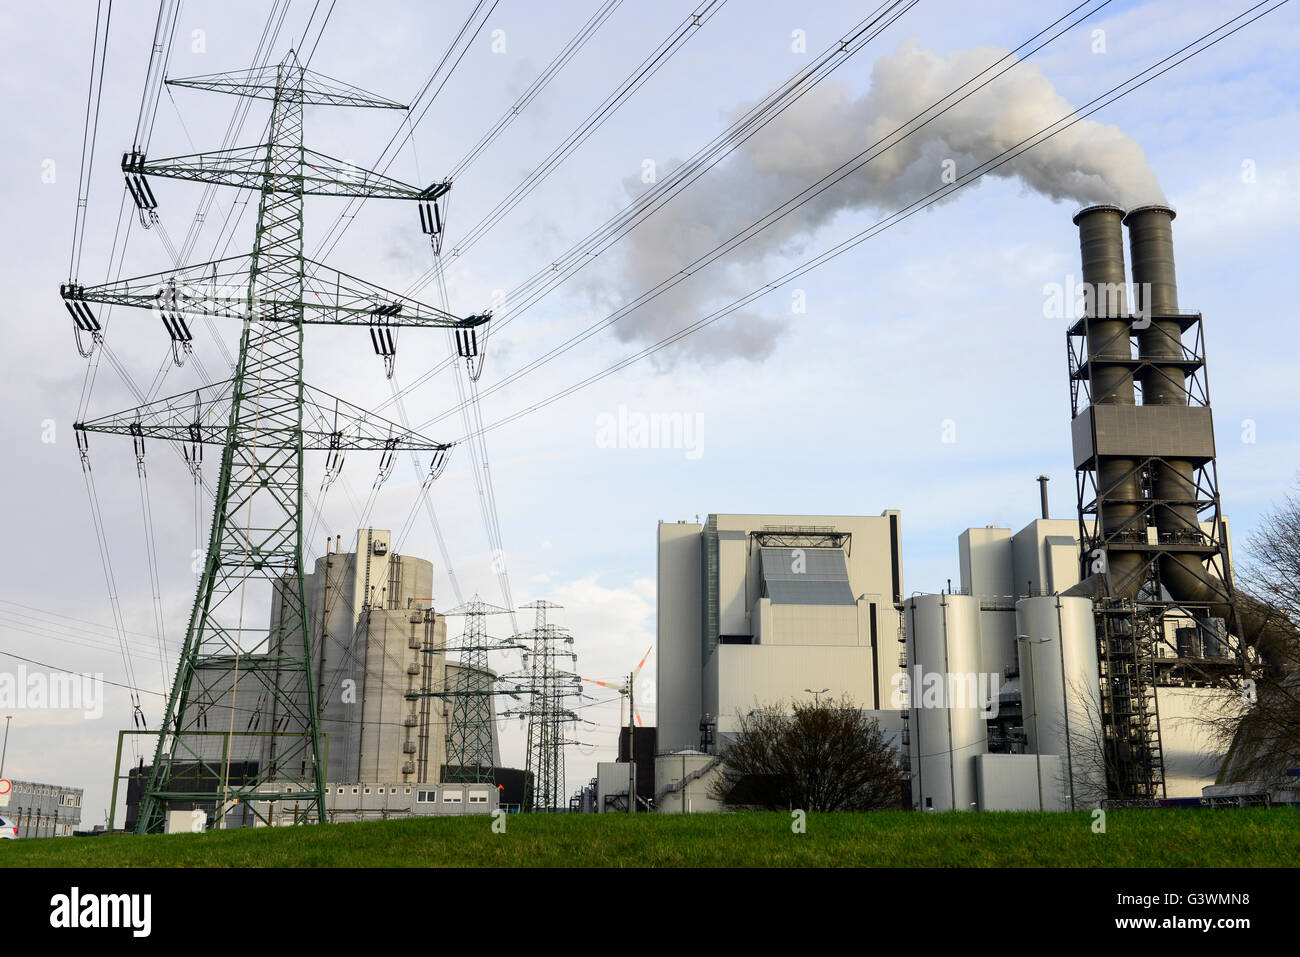 GERMANY Hamburg Moorburg, Vattenfall coal power station, burning of imported hard coal, CO2 carbon dioxide emissions from chimney and high voltage electricity transmission lattice steel tower Stock Photo